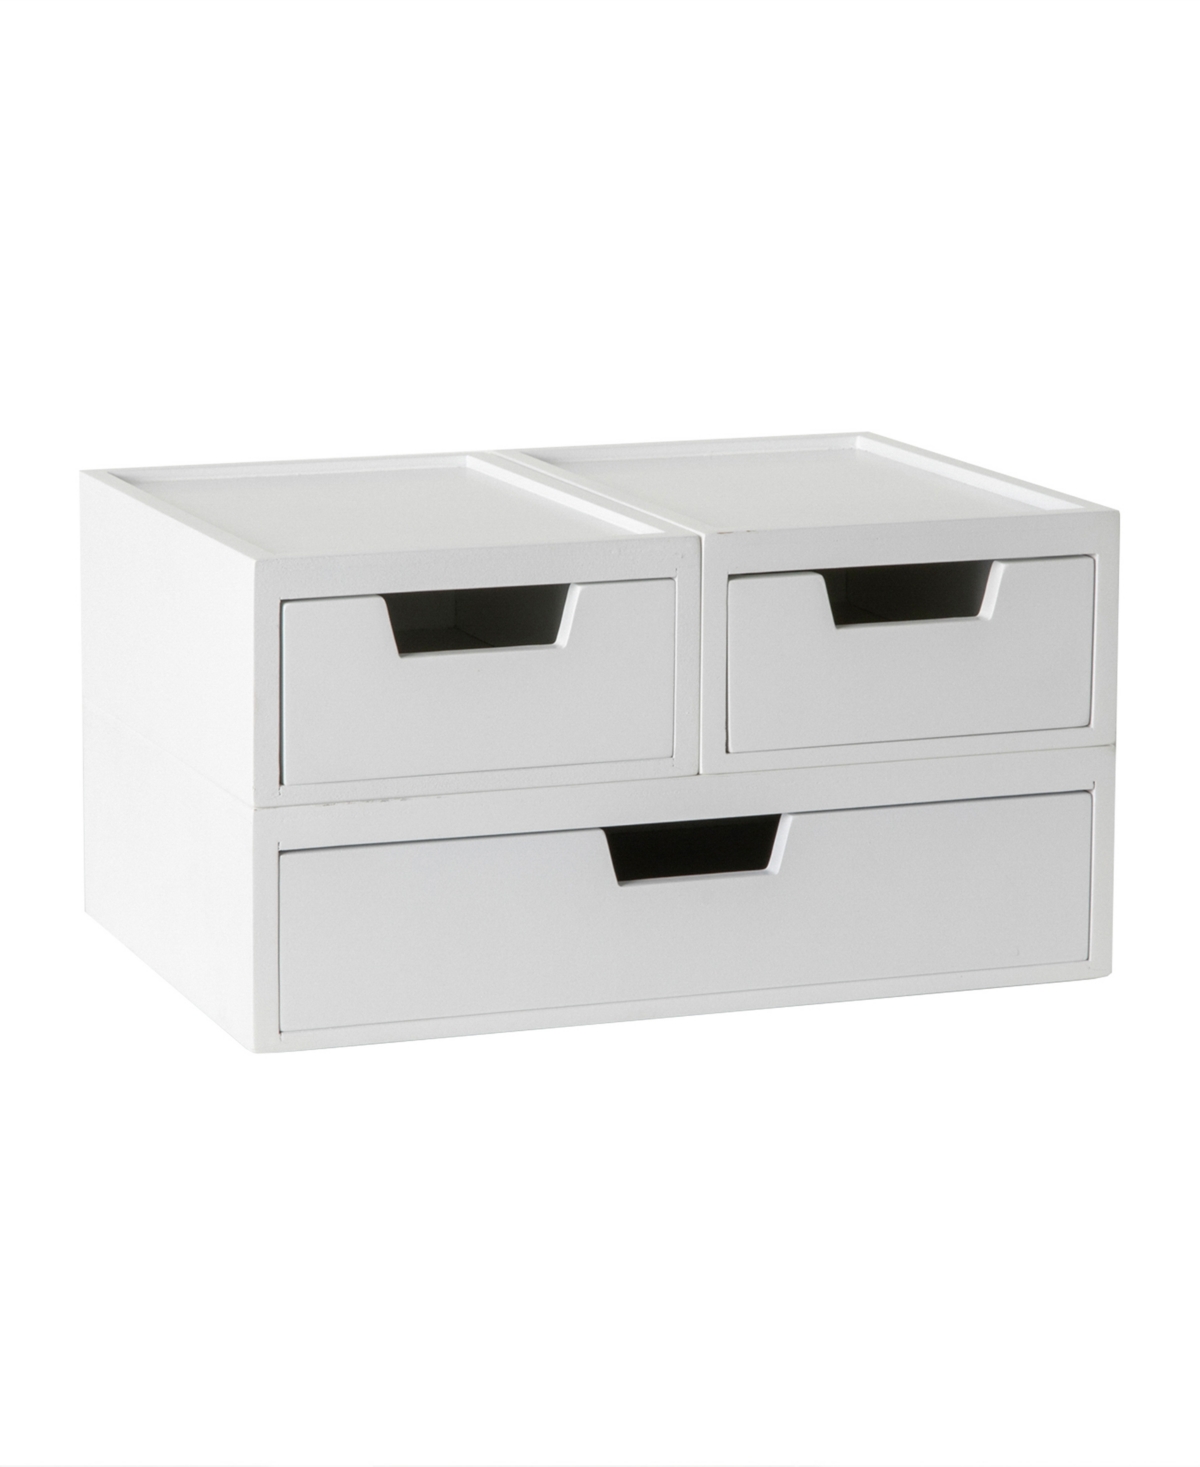 Weston Stackable Engineered Wood Boxes with Drawers, Office Desktop Organizers, 3 Compartments - White